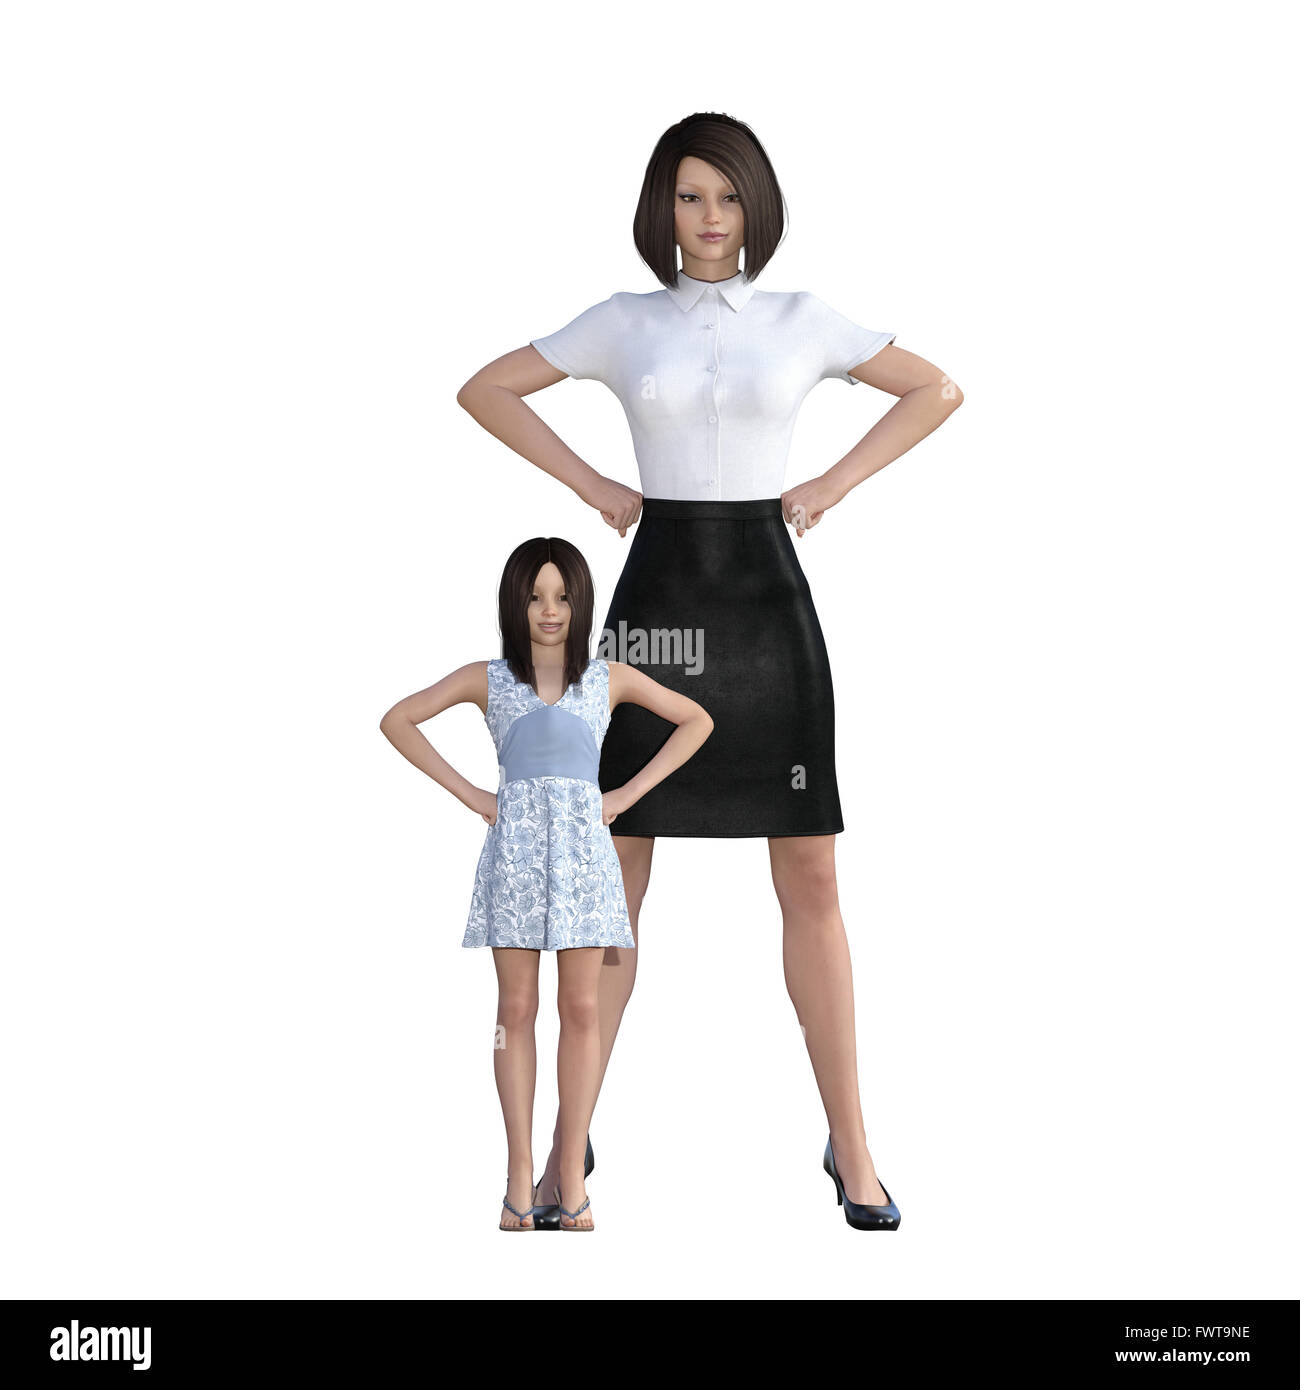 Mother Daughter Interaction of Proud Mom as an Illustration Concept Stock Photo